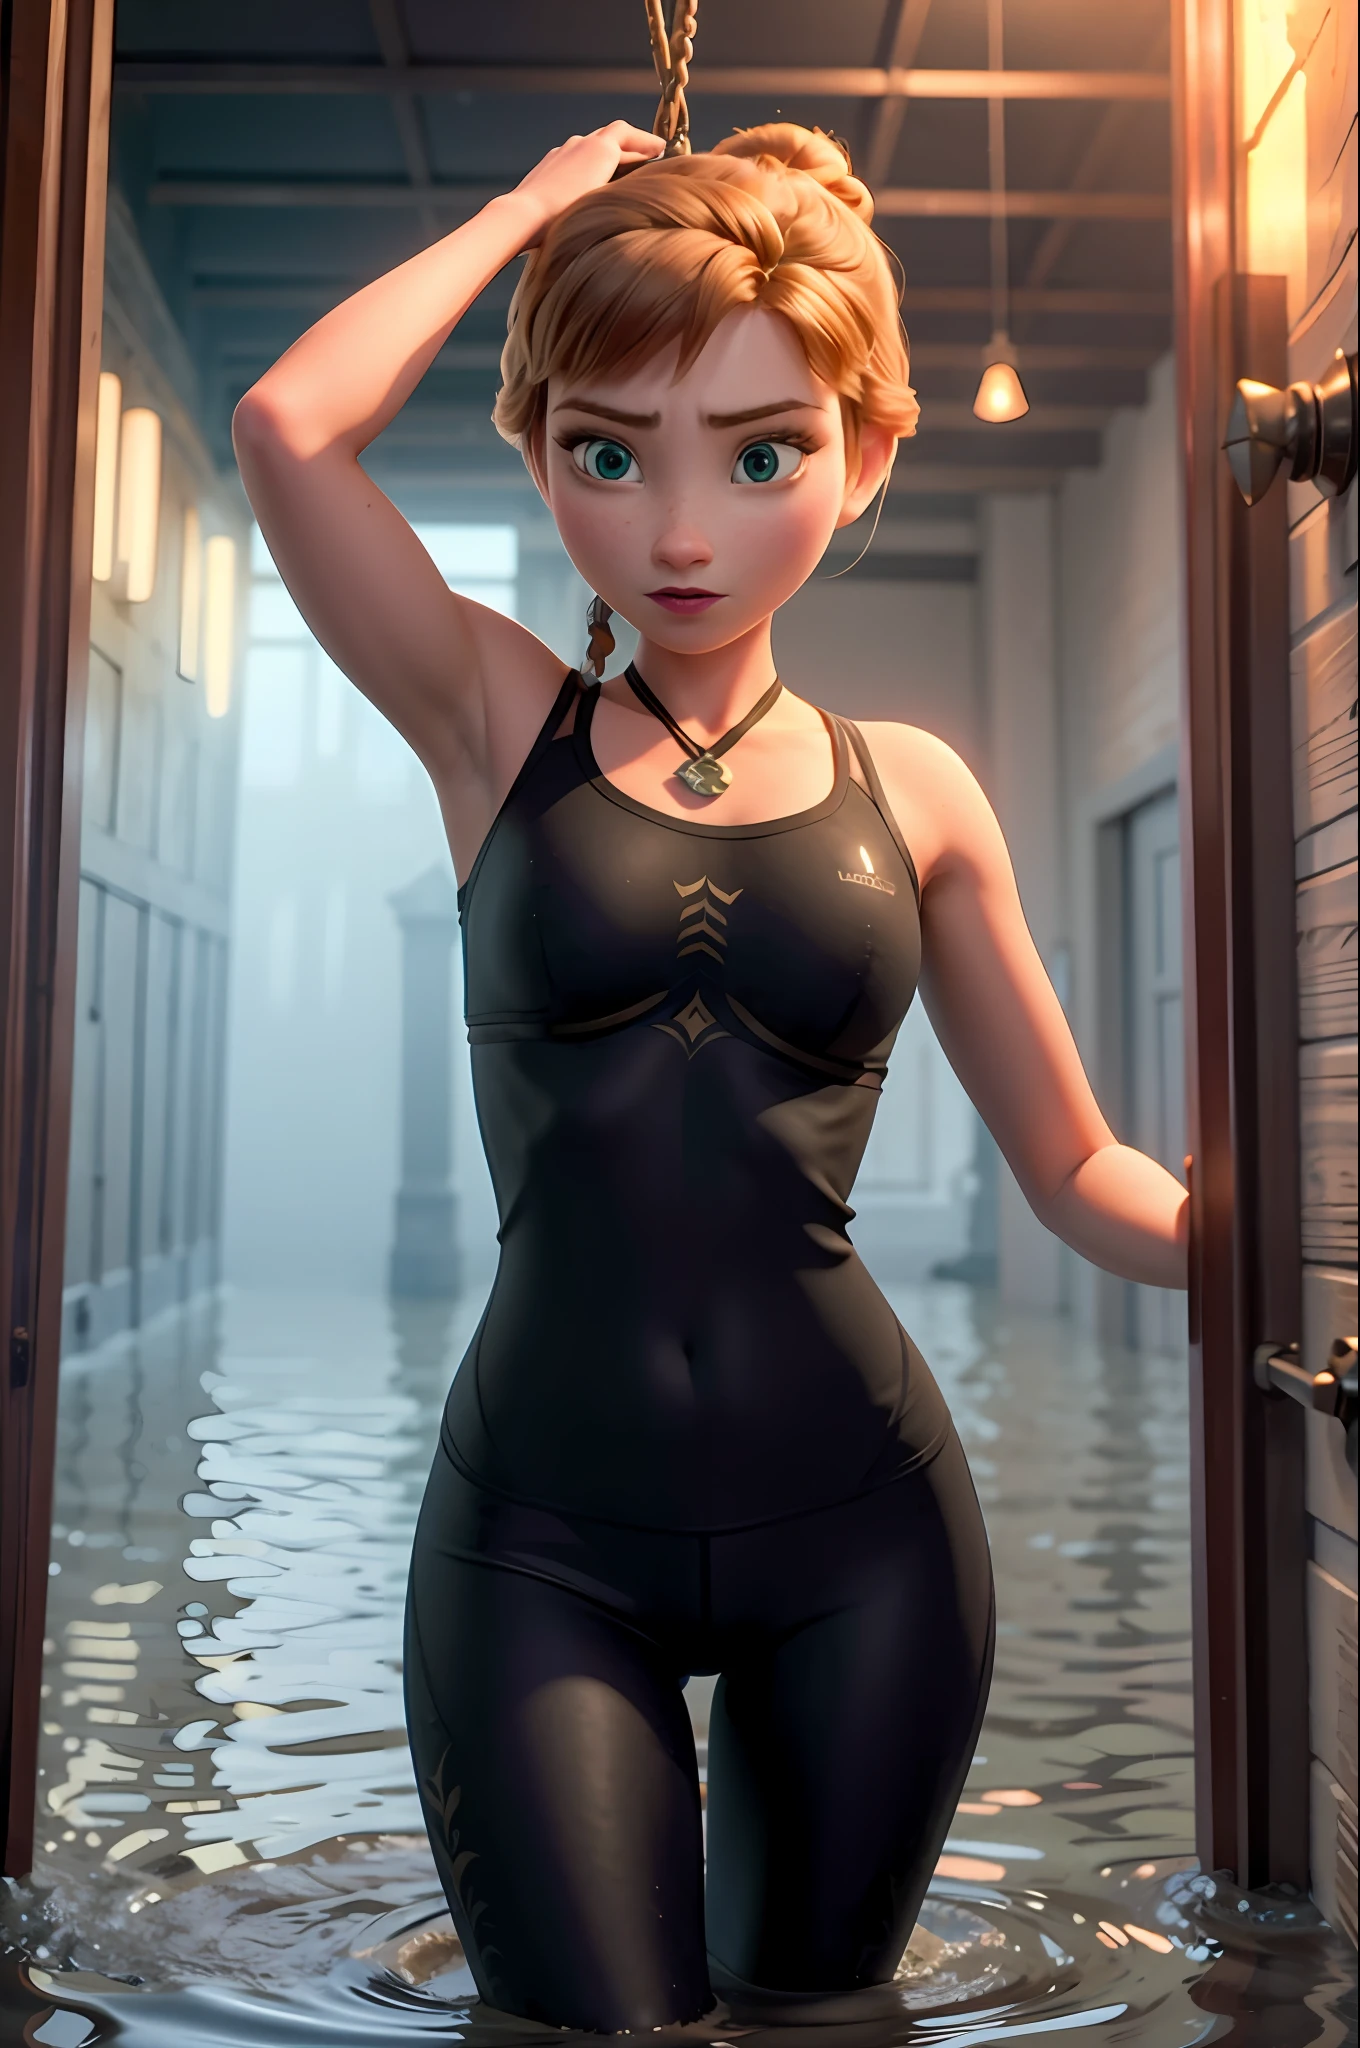 Photo of Anna of Arendelle standing in a flooded dungeon cell, hand tie to a chain Hanging from the ceiling. Wearing sexy yoga clothes